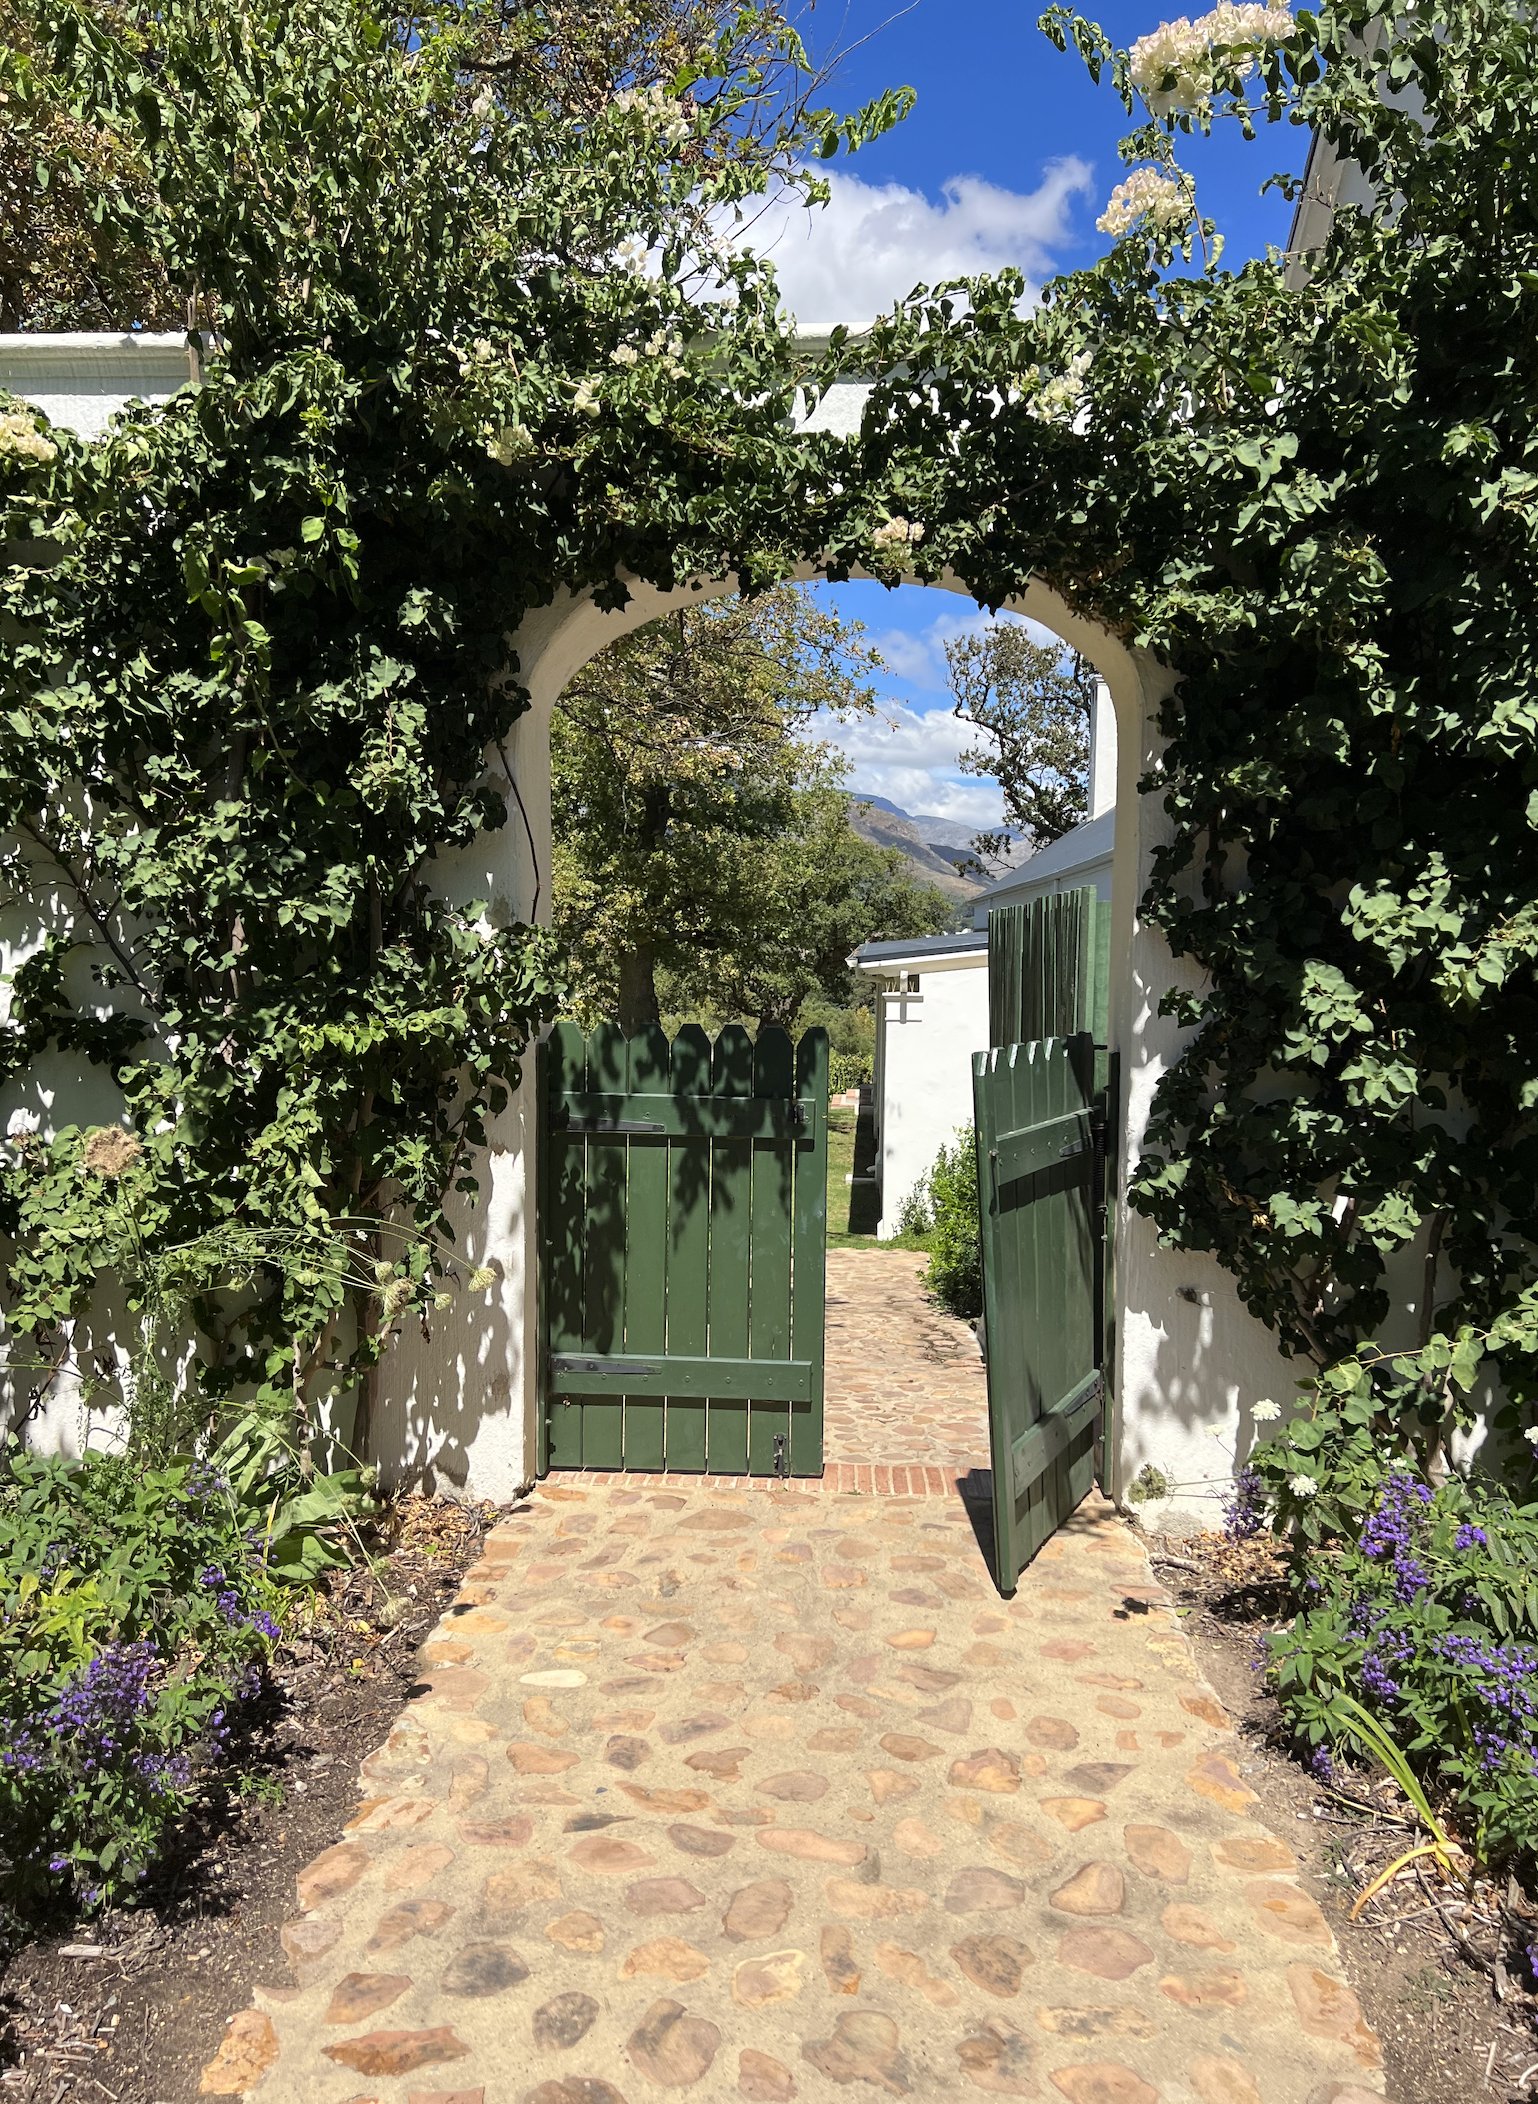 La Cotte is a perfect boutique hotel option in Franschhoek for those who do not want to spend too much on accommodation.